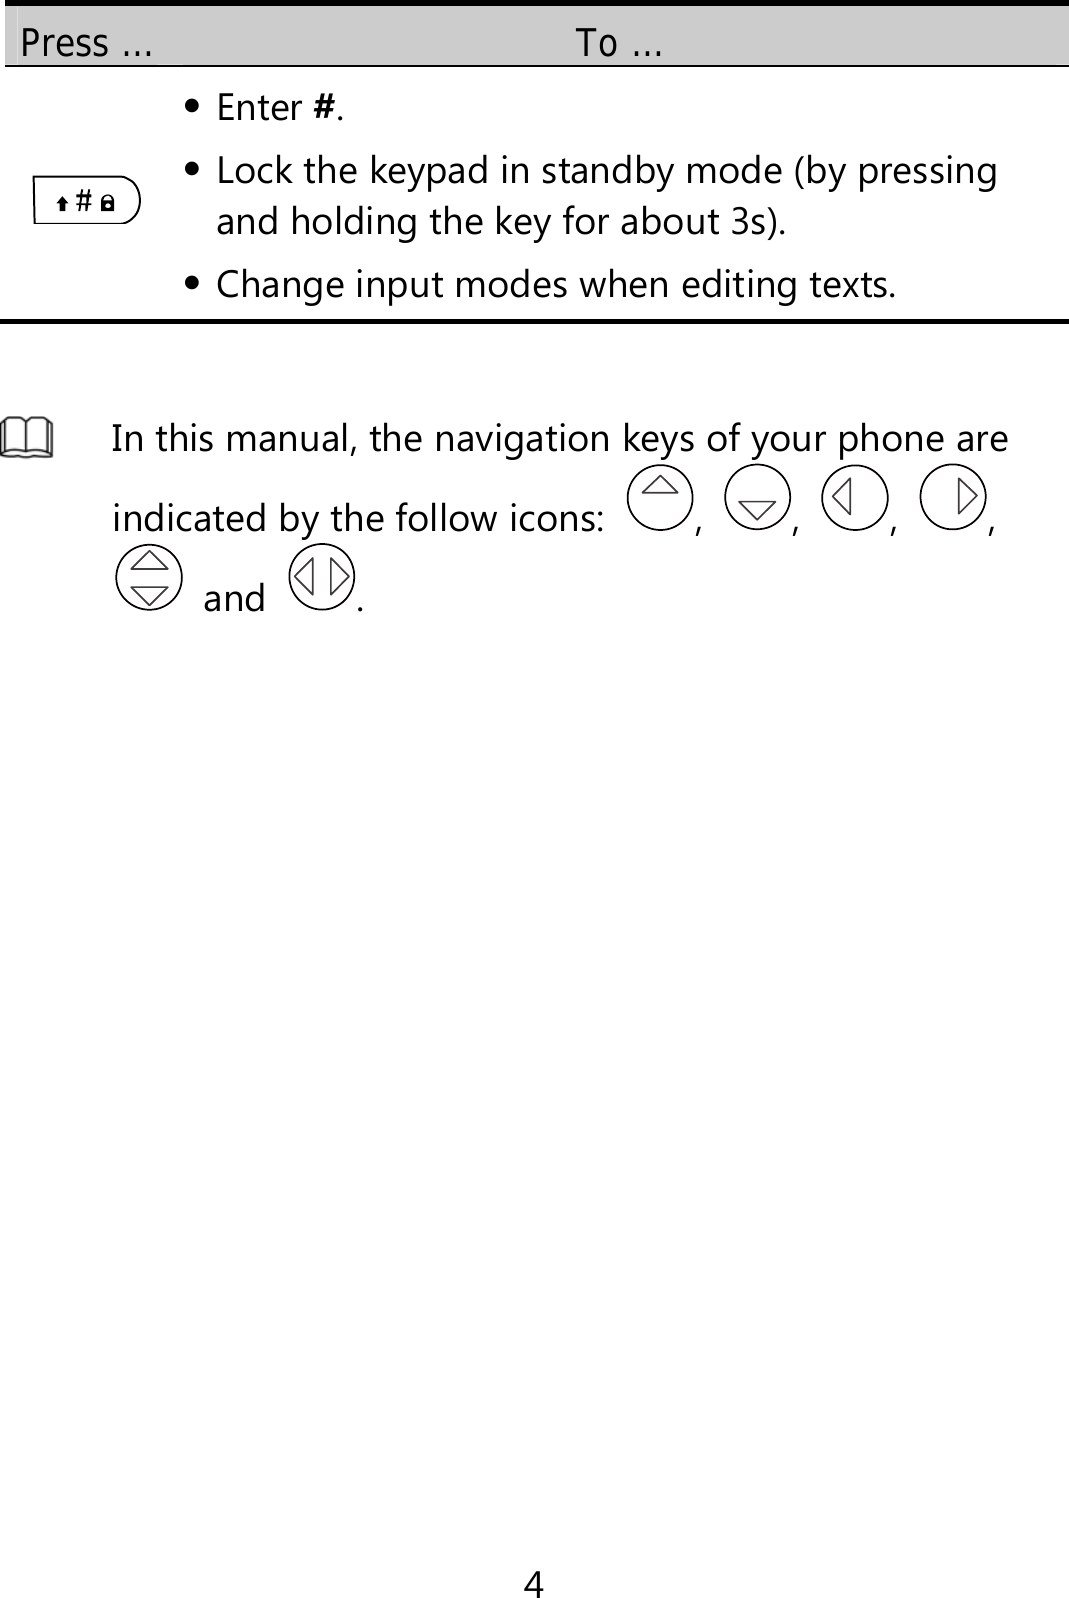 4 Press …  To …   Enter #.  Lock the keypad in standby mode (by pressing and holding the key for about 3s).  Change input modes when editing texts.   In this manual, the navigation keys of your phone are indicated by the follow icons:  ,  ,  ,  ,  and  .  